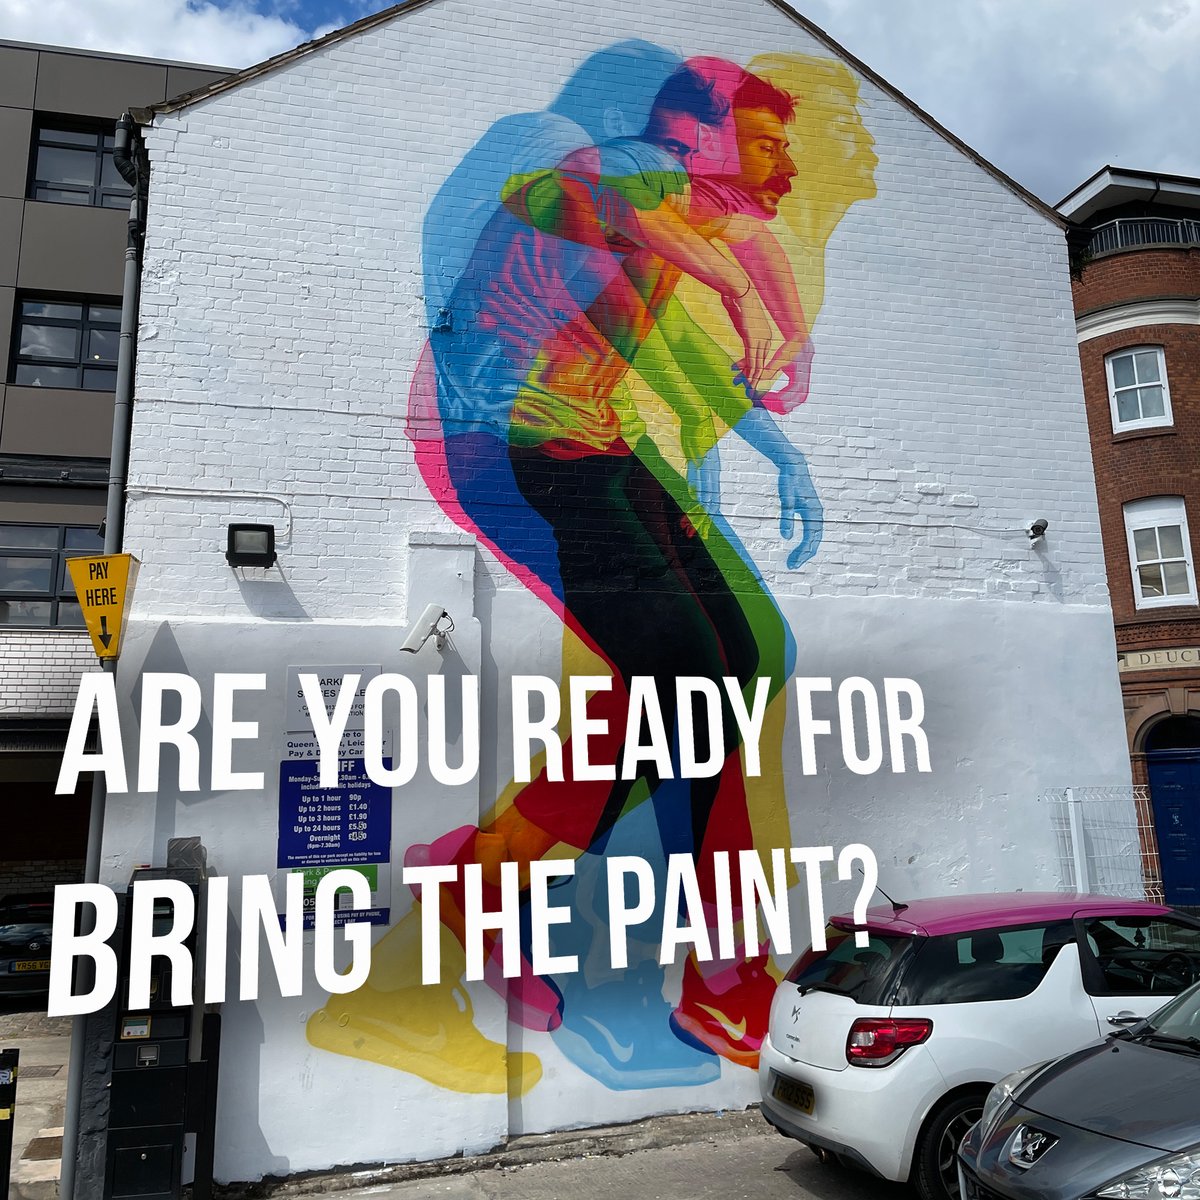 Starting this Monday, are you ready for Bring The Paint? Check out our new blog with details of all the events, locations and artists set to transform Leicester! Read it here ow.ly/cboA50RH53g #visitleicester #leicester #art #streetart #graffiti @visitenglandbiz